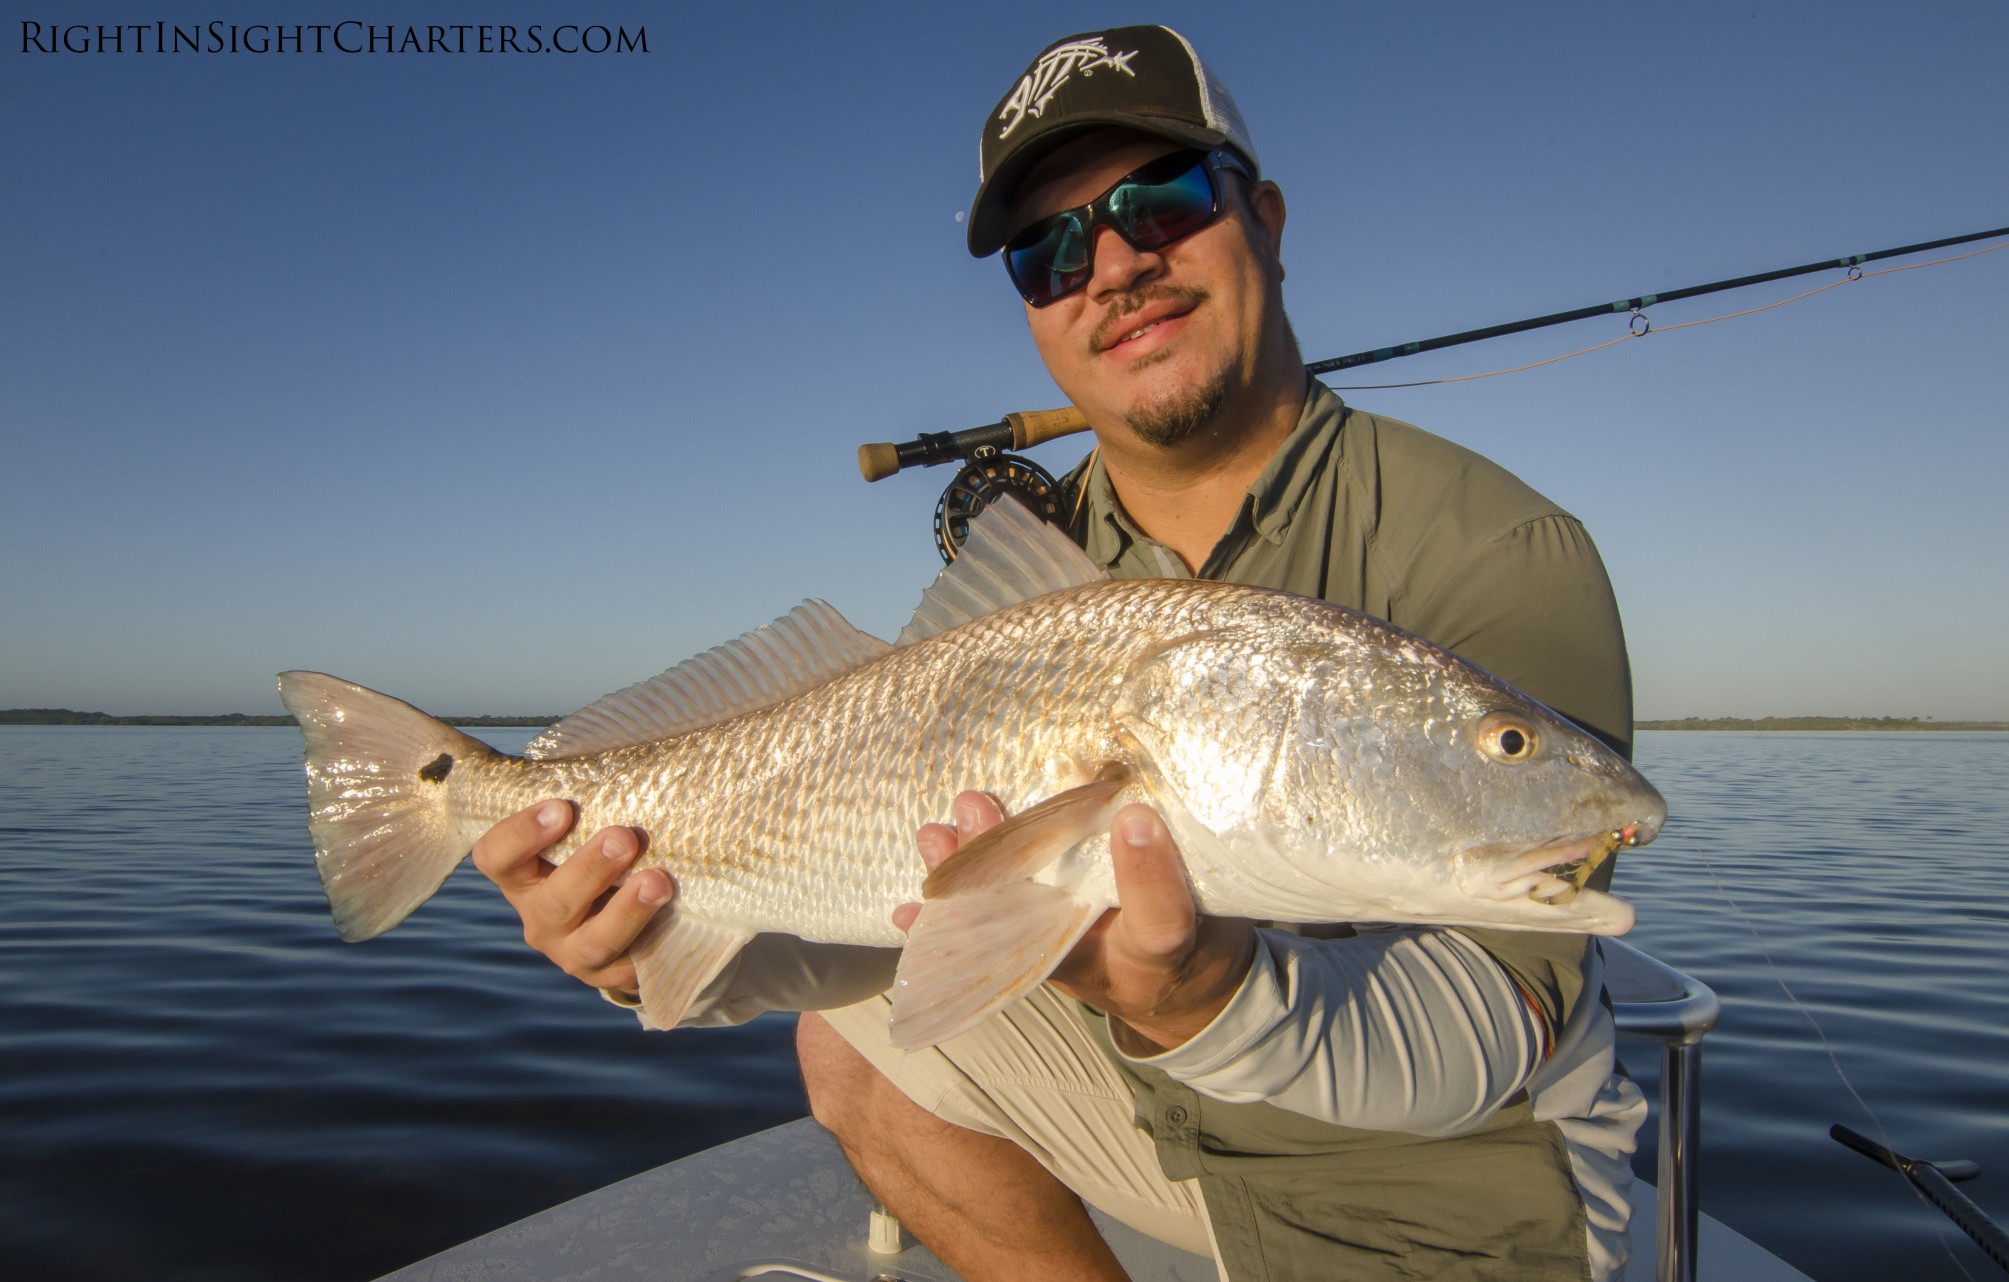 fly fishing-fly fishing for redfish-redfish on fly-mosquito lagoon fly fishing-east cape skiffs-right in sight charters-sight fishing-florida fly fishing